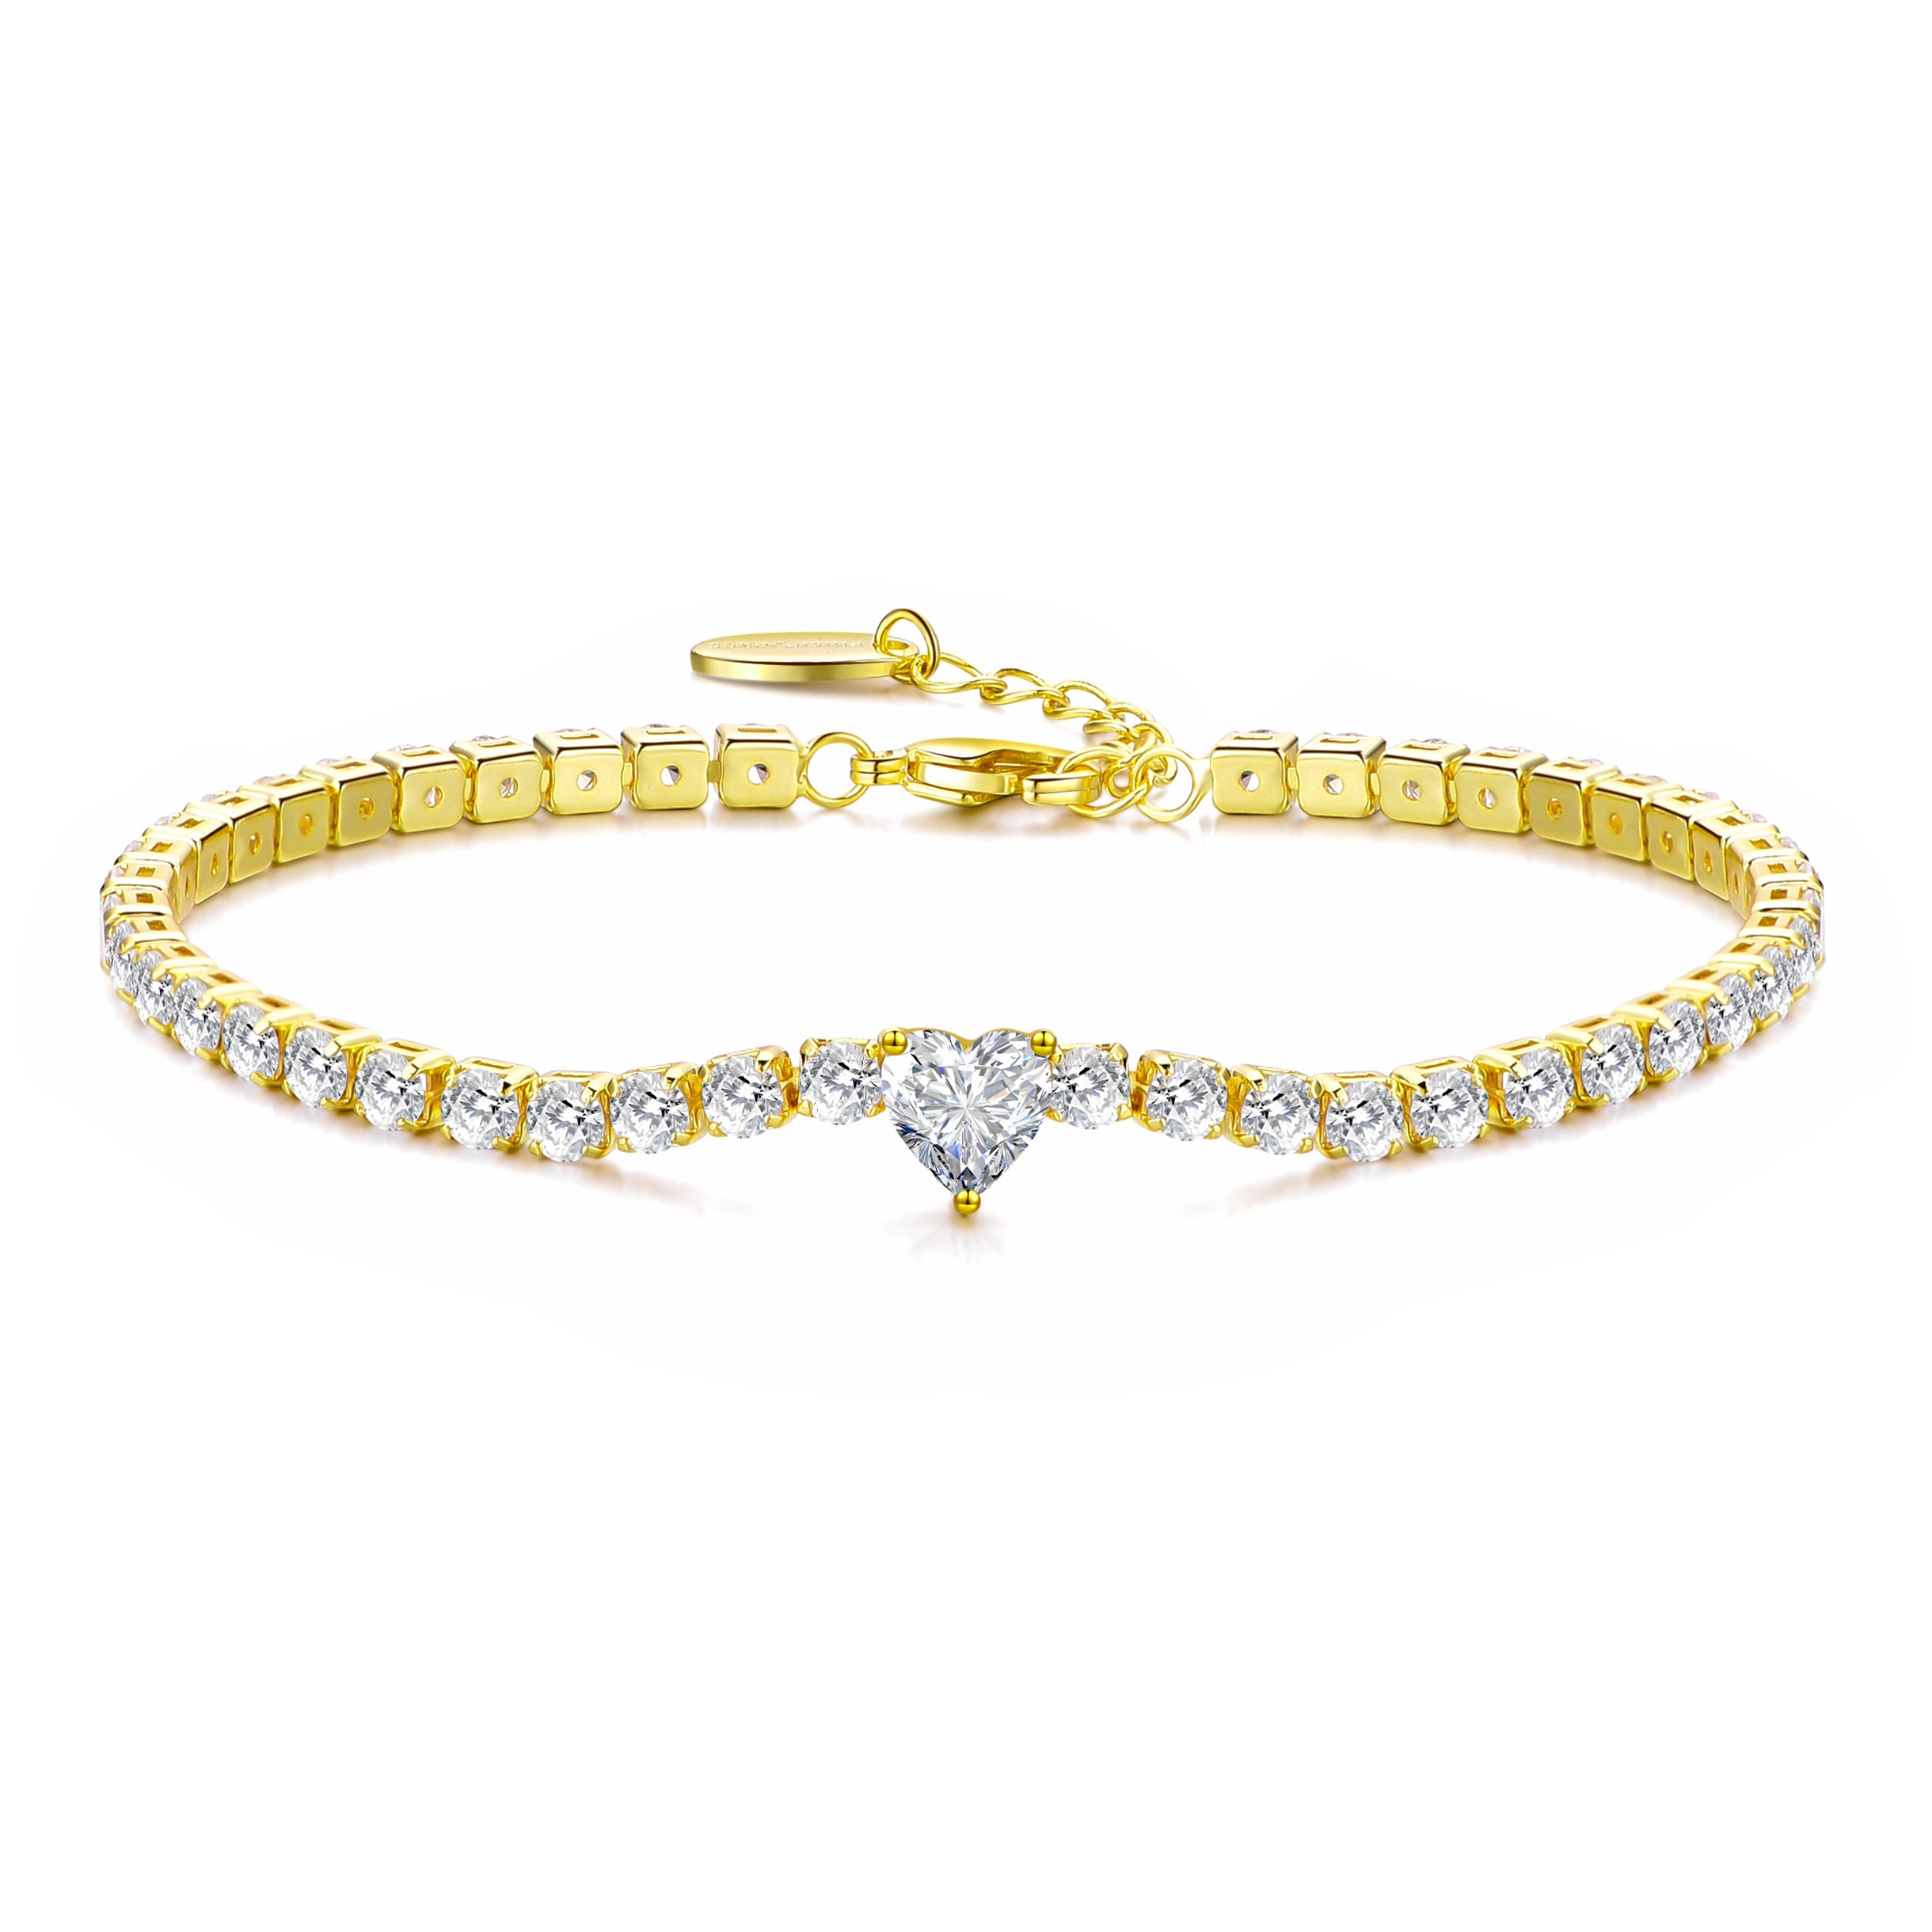 Gold Plated Heart Solitaire Tennis Bracelet Created with Zircondia® Crystals by Philip Jones Jewellery